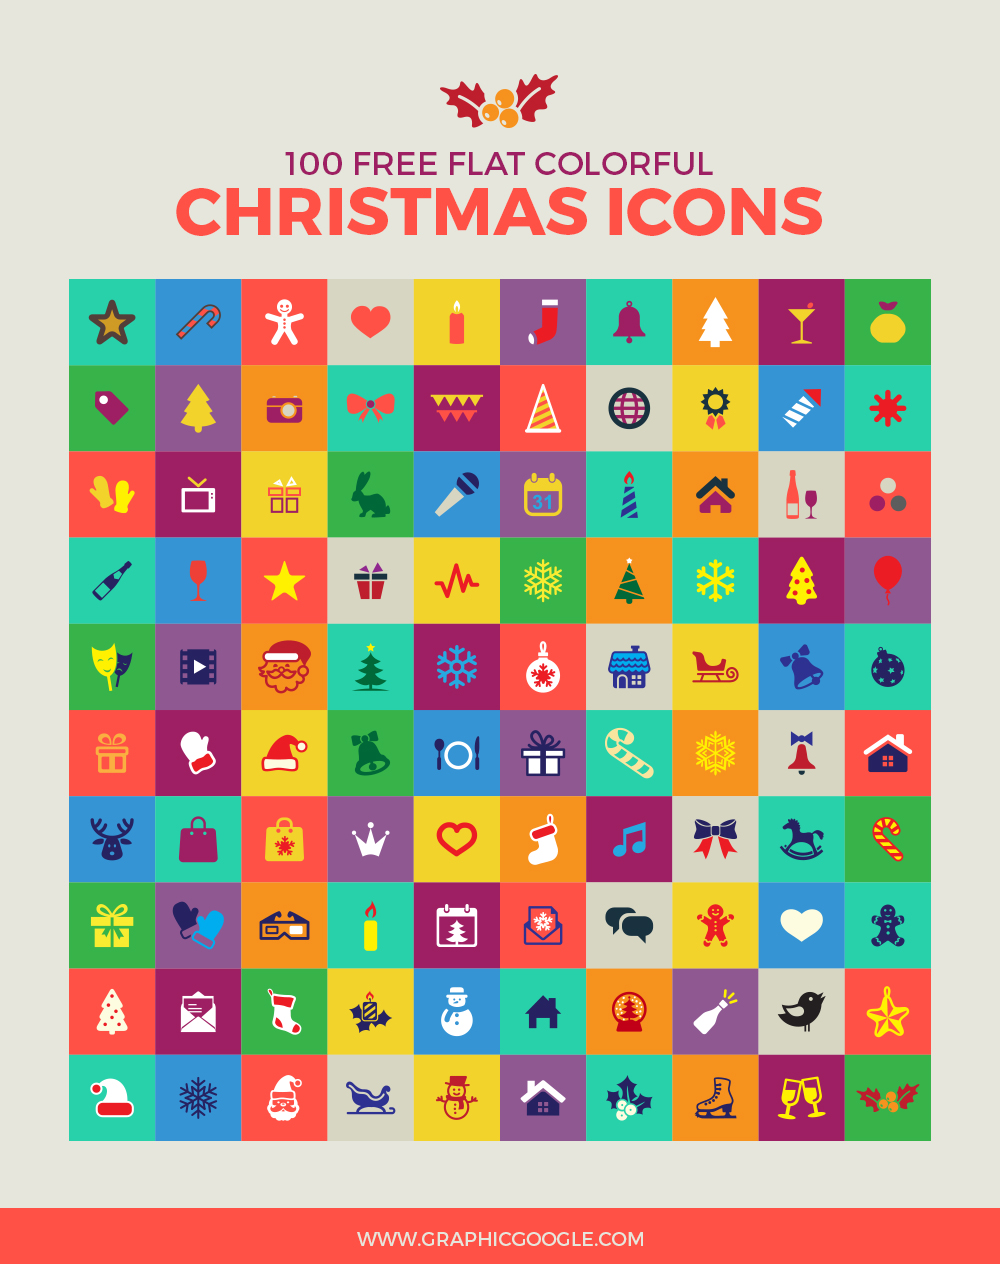 100-free-flat-colorful-christmas-icons-preview-2